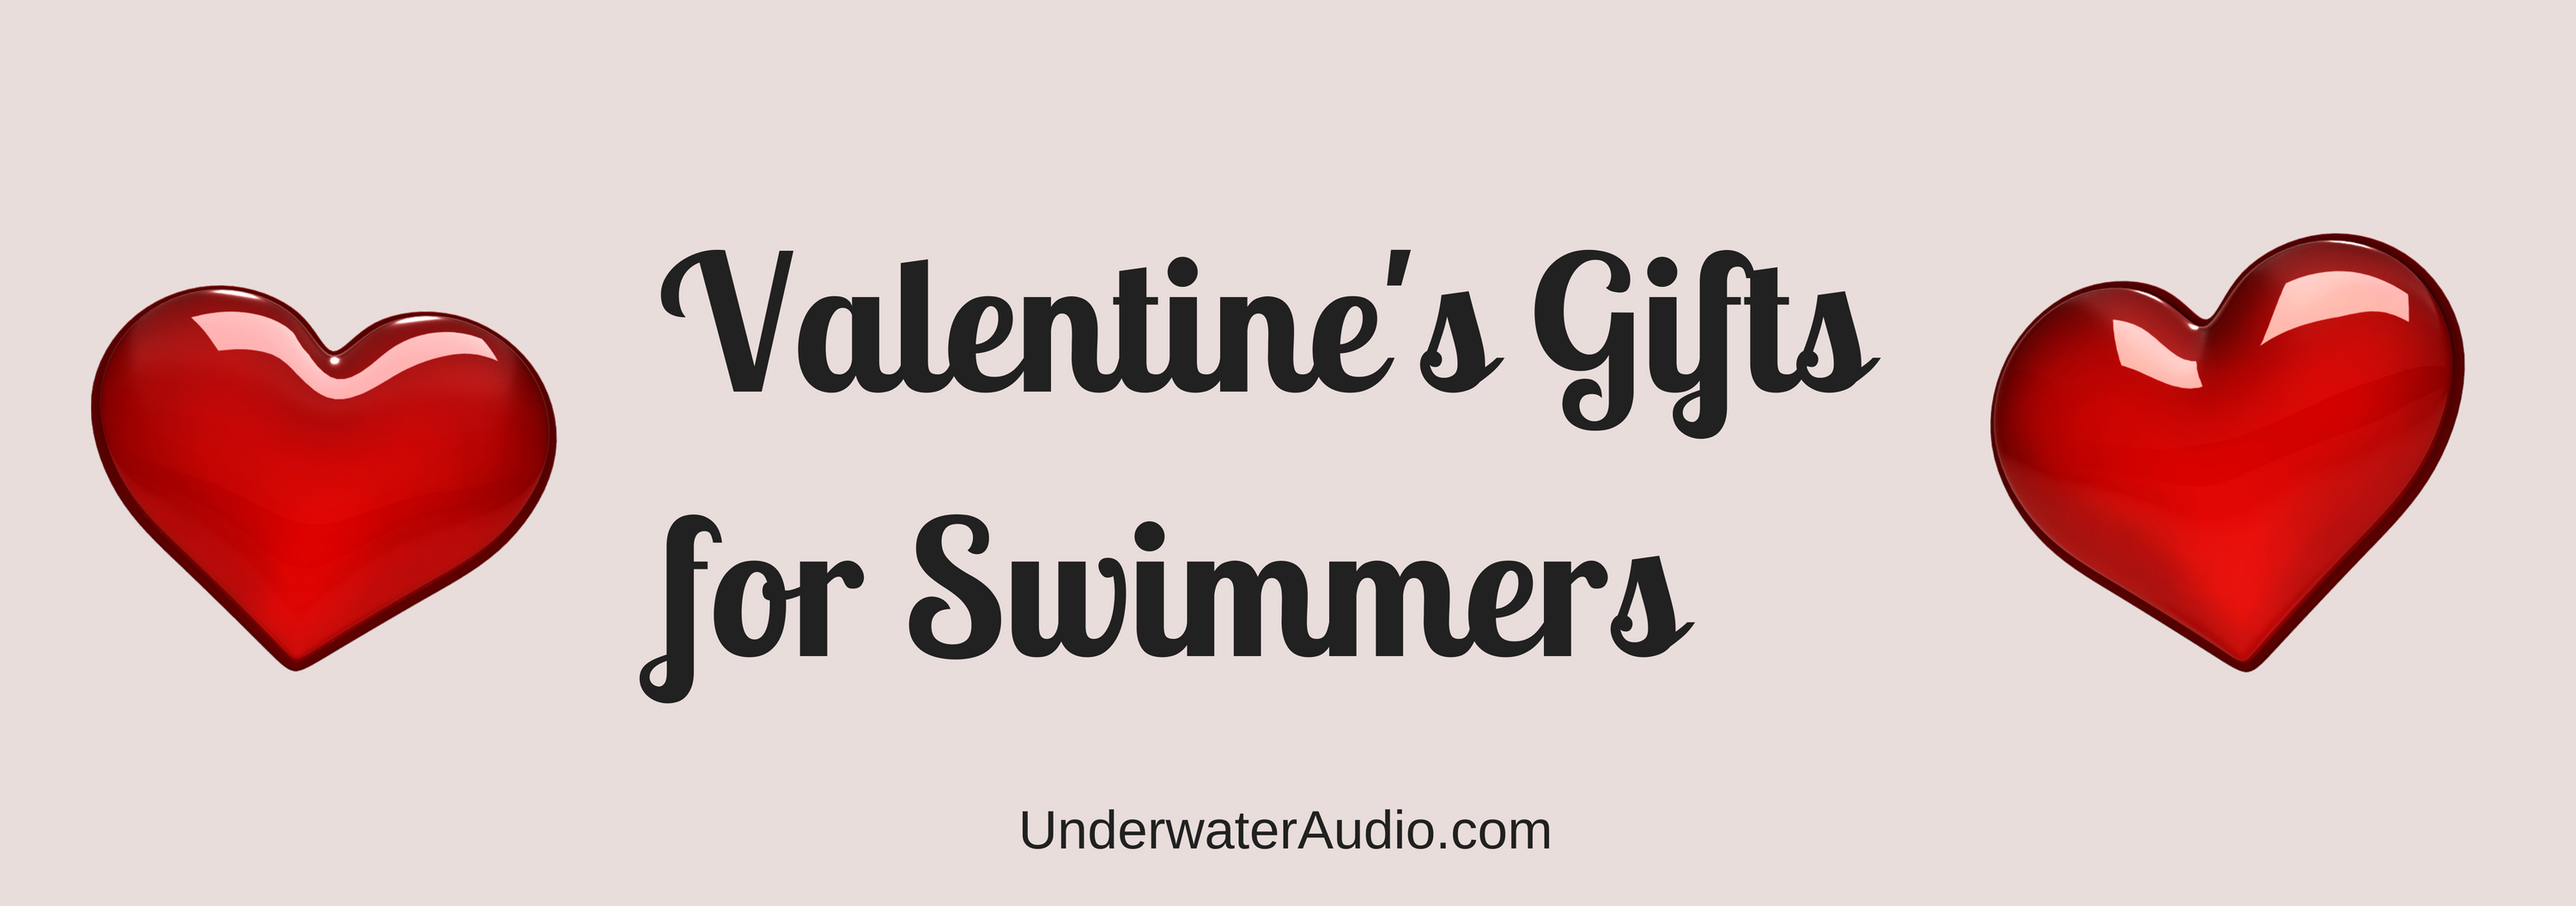 How to Buy Valentine's Gifts for Swimmers